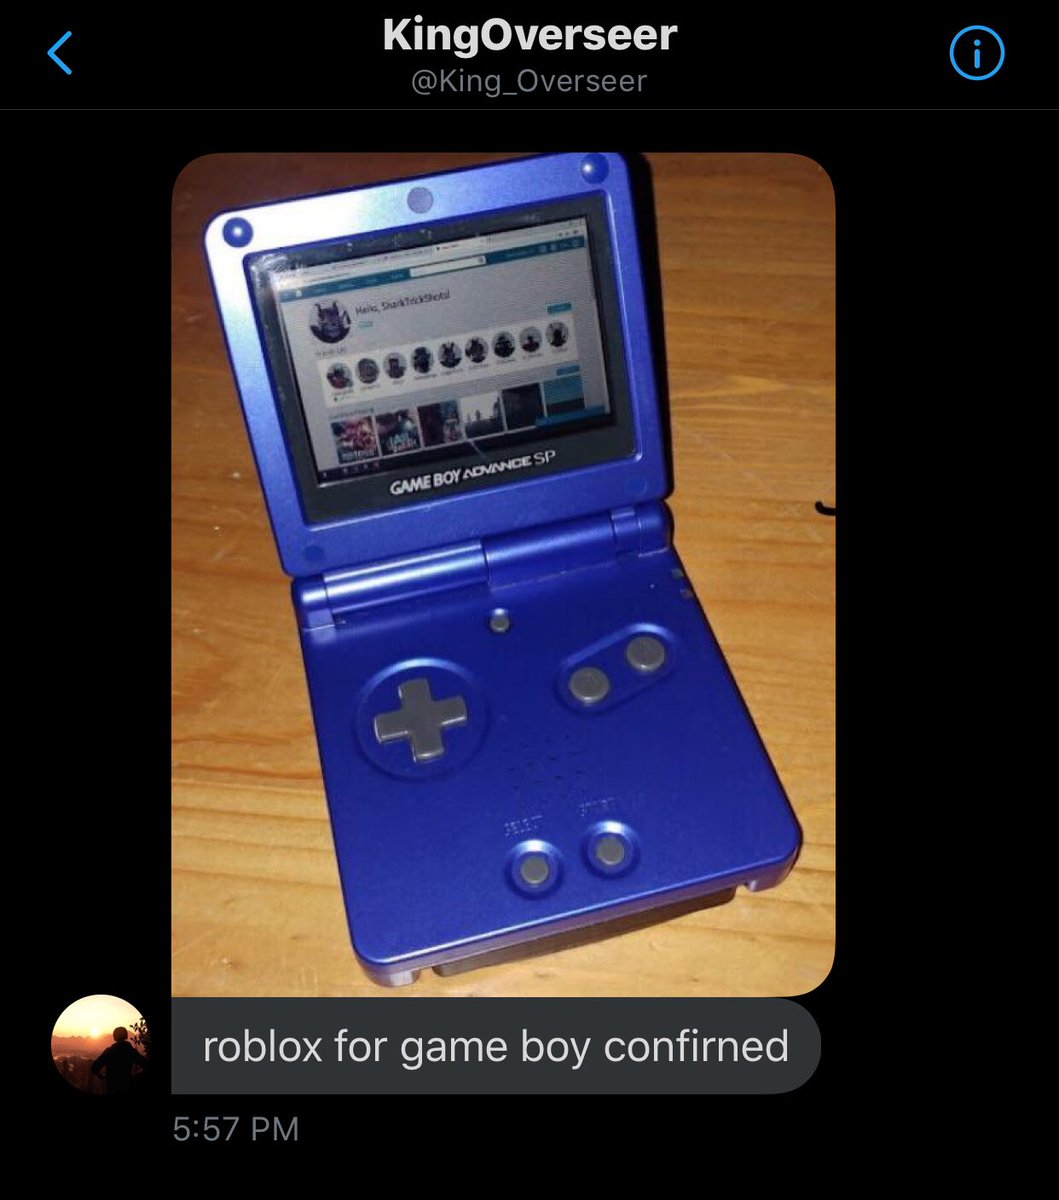 News Roblox On Twitter Roblox Now Available For The Gameboy - hbv on twitter xhellokayla lmao its apocalypse rising on roblox